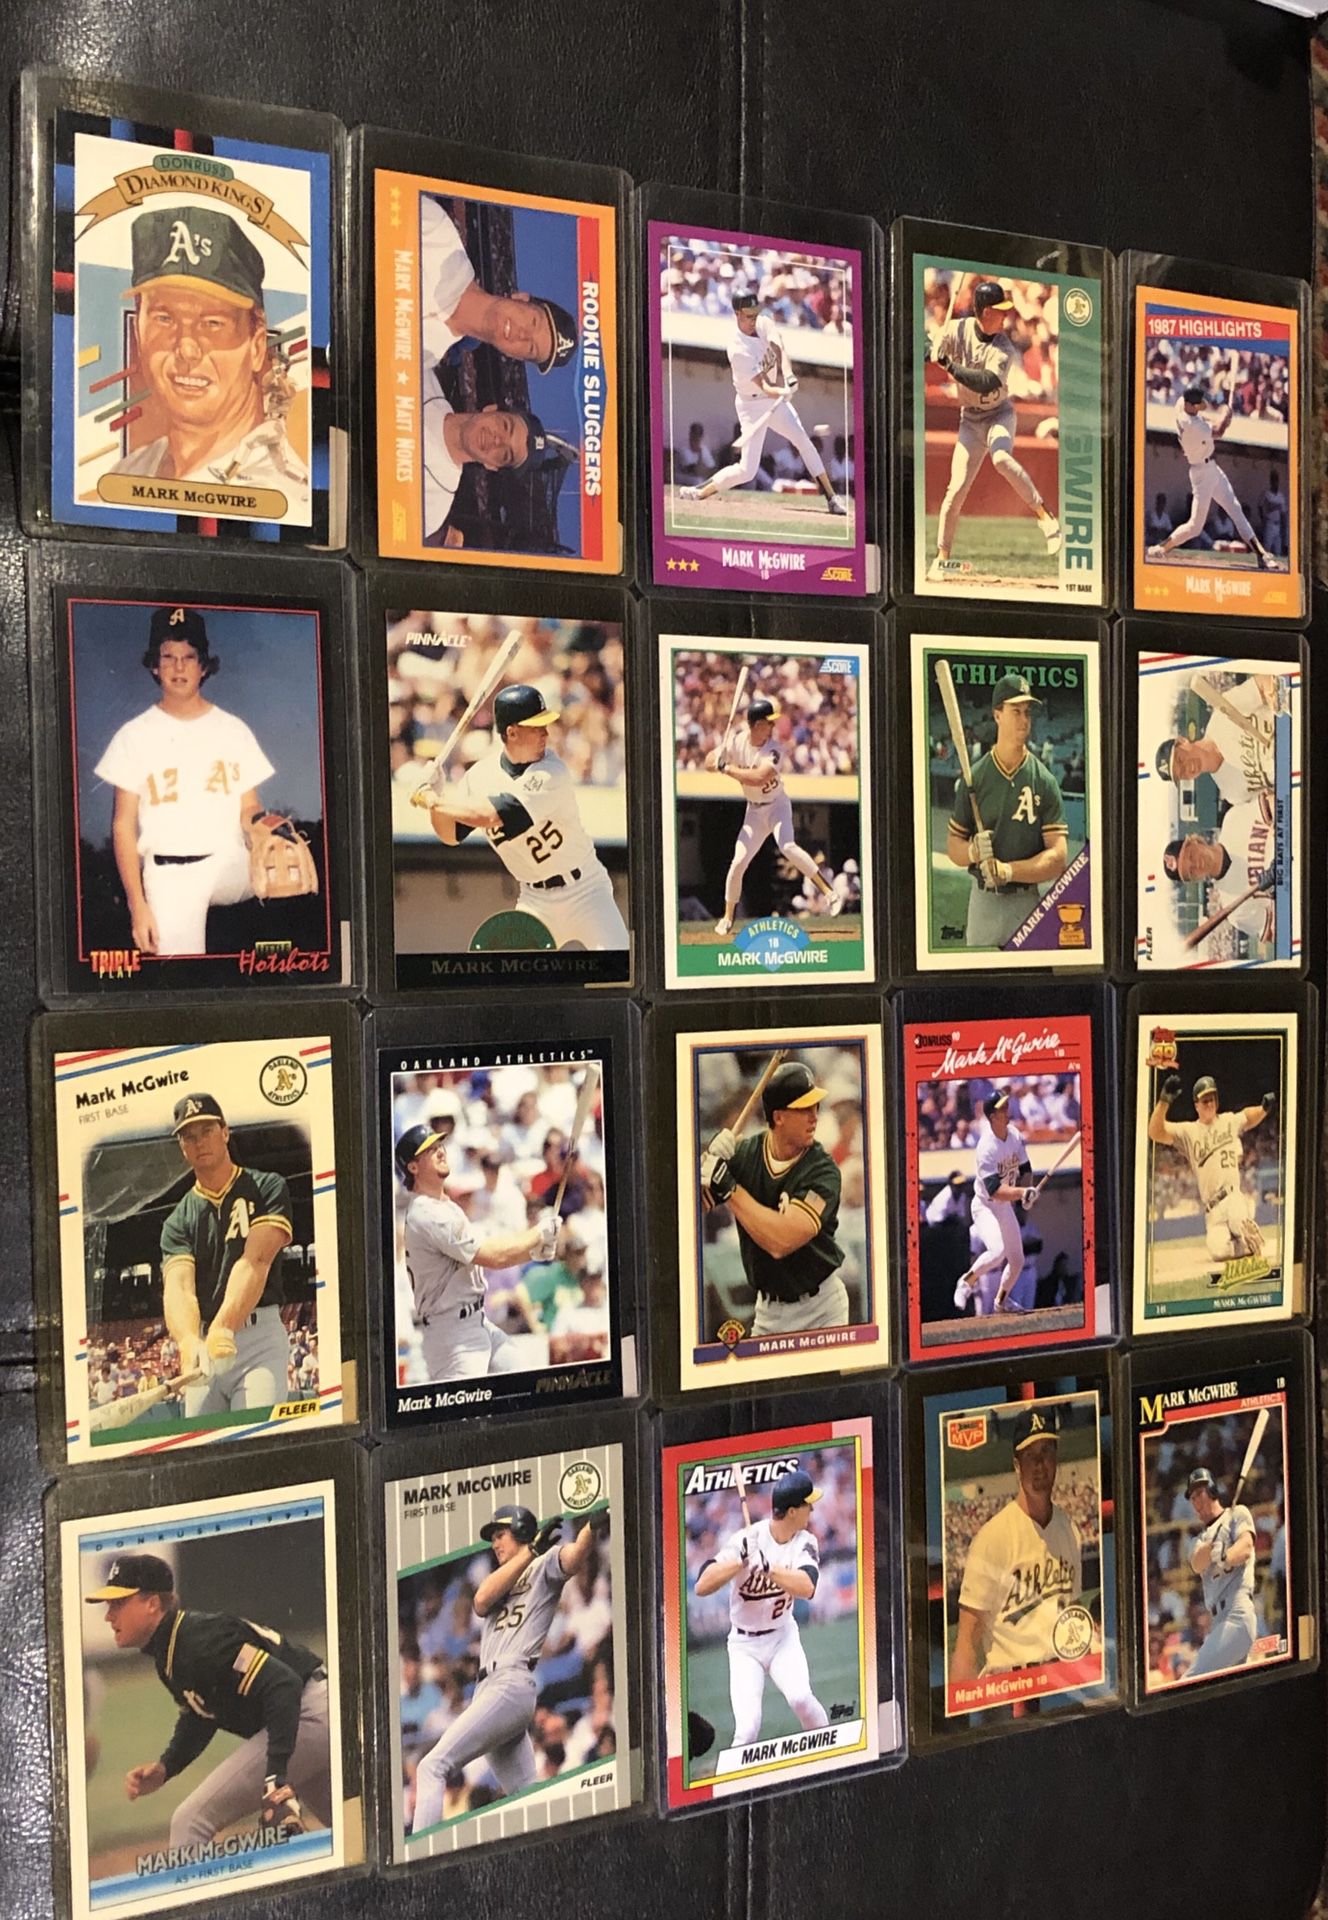 Mark McGwire 20 baseball card collection 1988-93 ESTATE SALE FIND Topps A’s